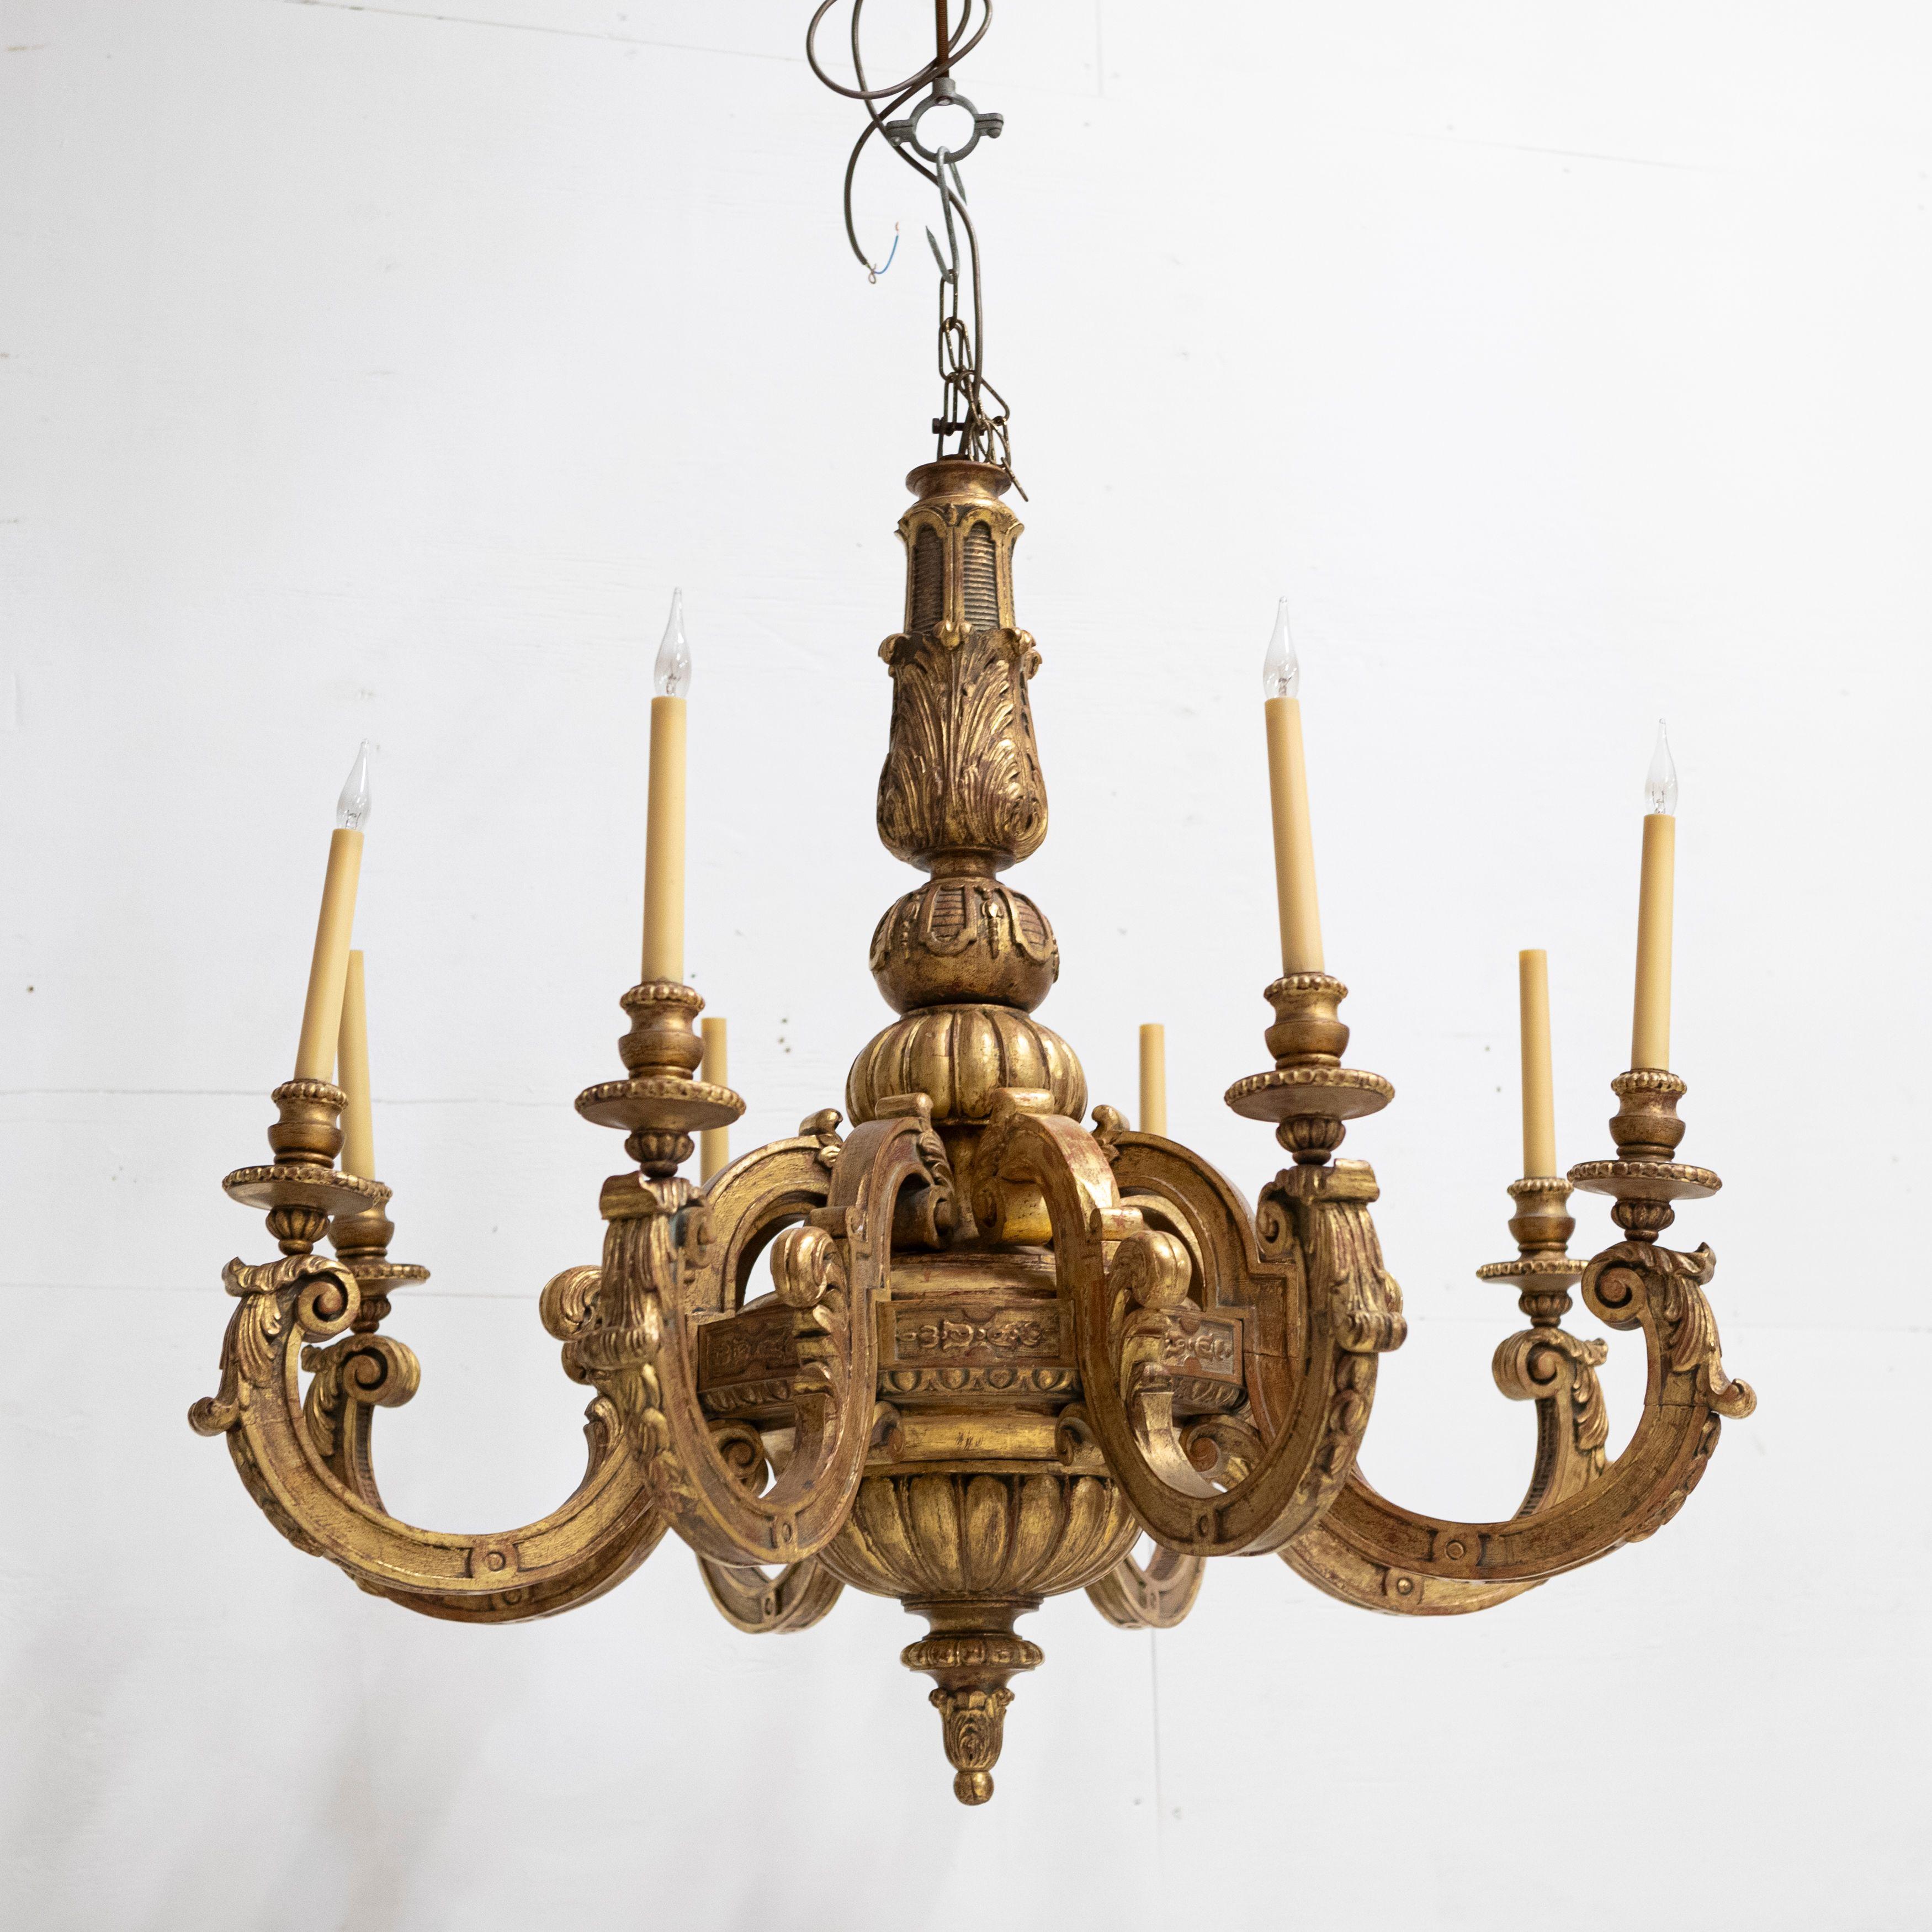 This large mid-19th-century chandelier is composed of 8 ornate giltwood S shape arms.

The intricate detailing throughout this carved piece provides an opulent light feature.

Decorative foliage adorns the scrolling arms with trumpet bobeche drip